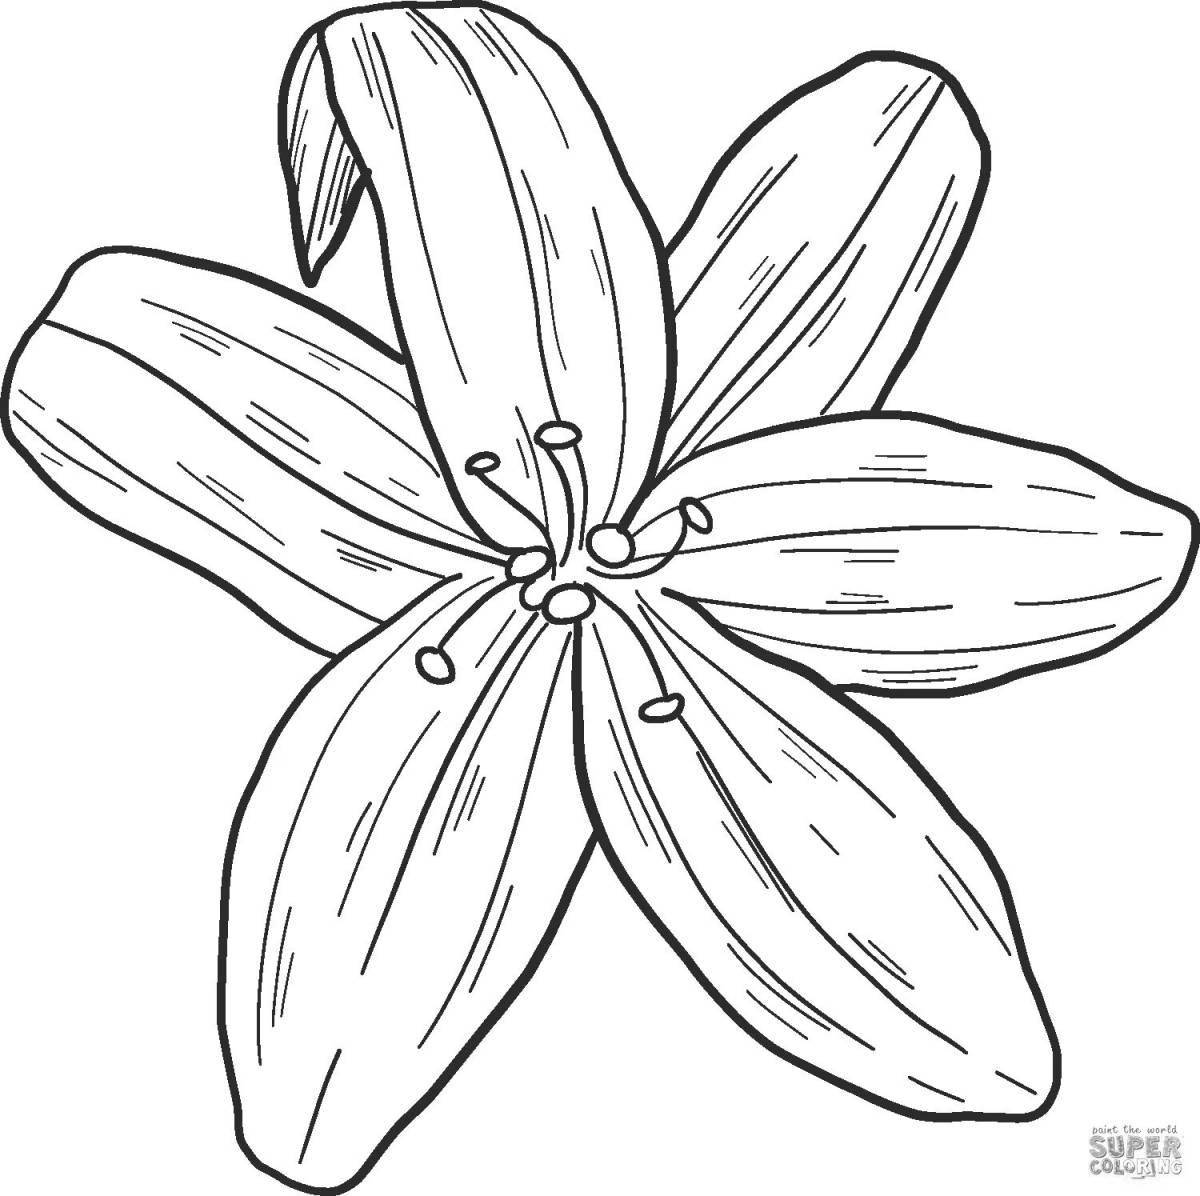 Exquisite lily coloring page